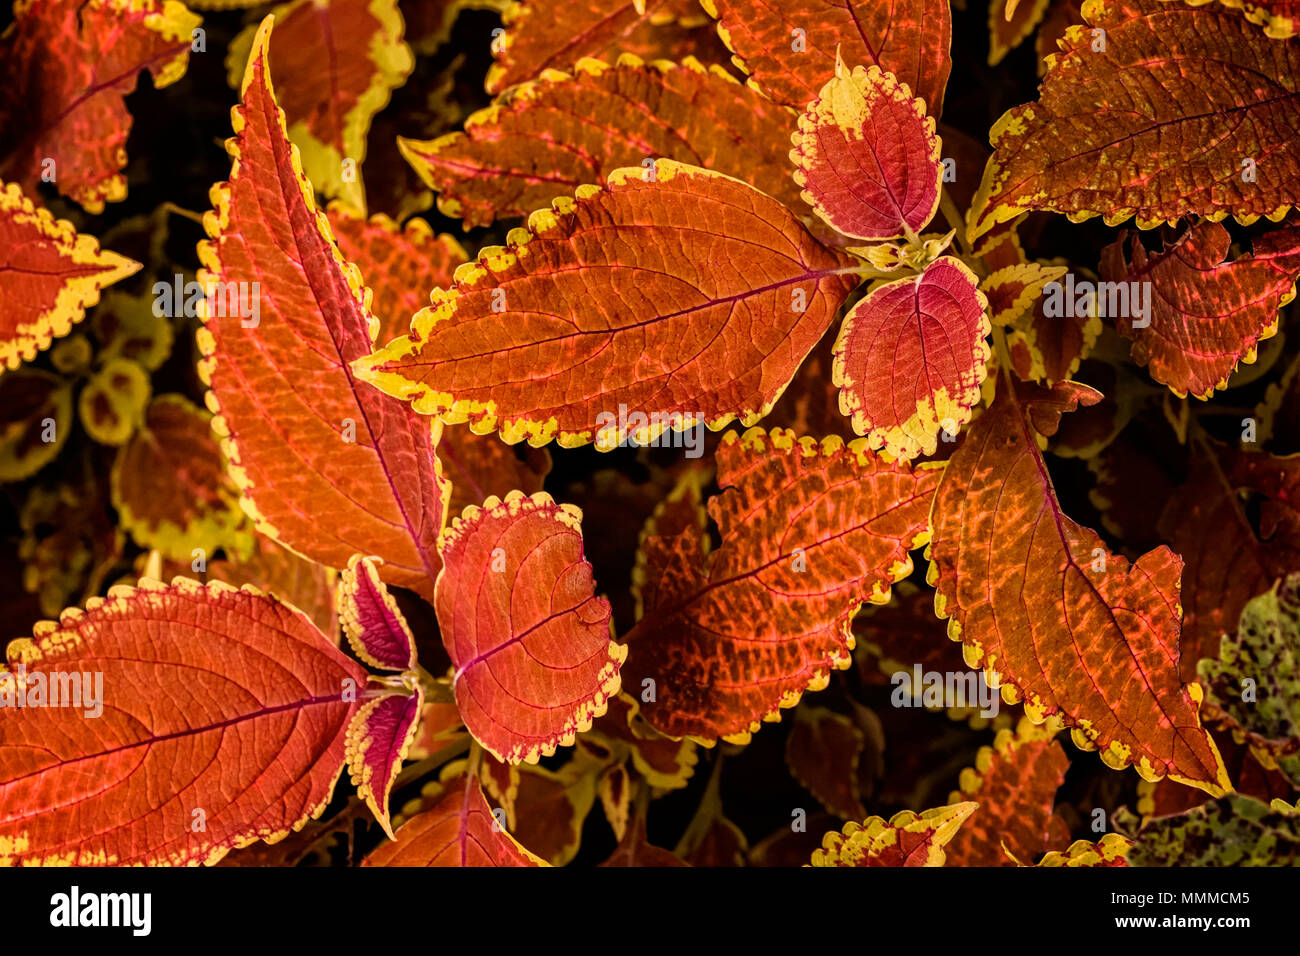 Close look at the intricate leaves of a colorful Coleus plant. This variety has bright mostly redish  leaves with yellow edges. Stock Photo